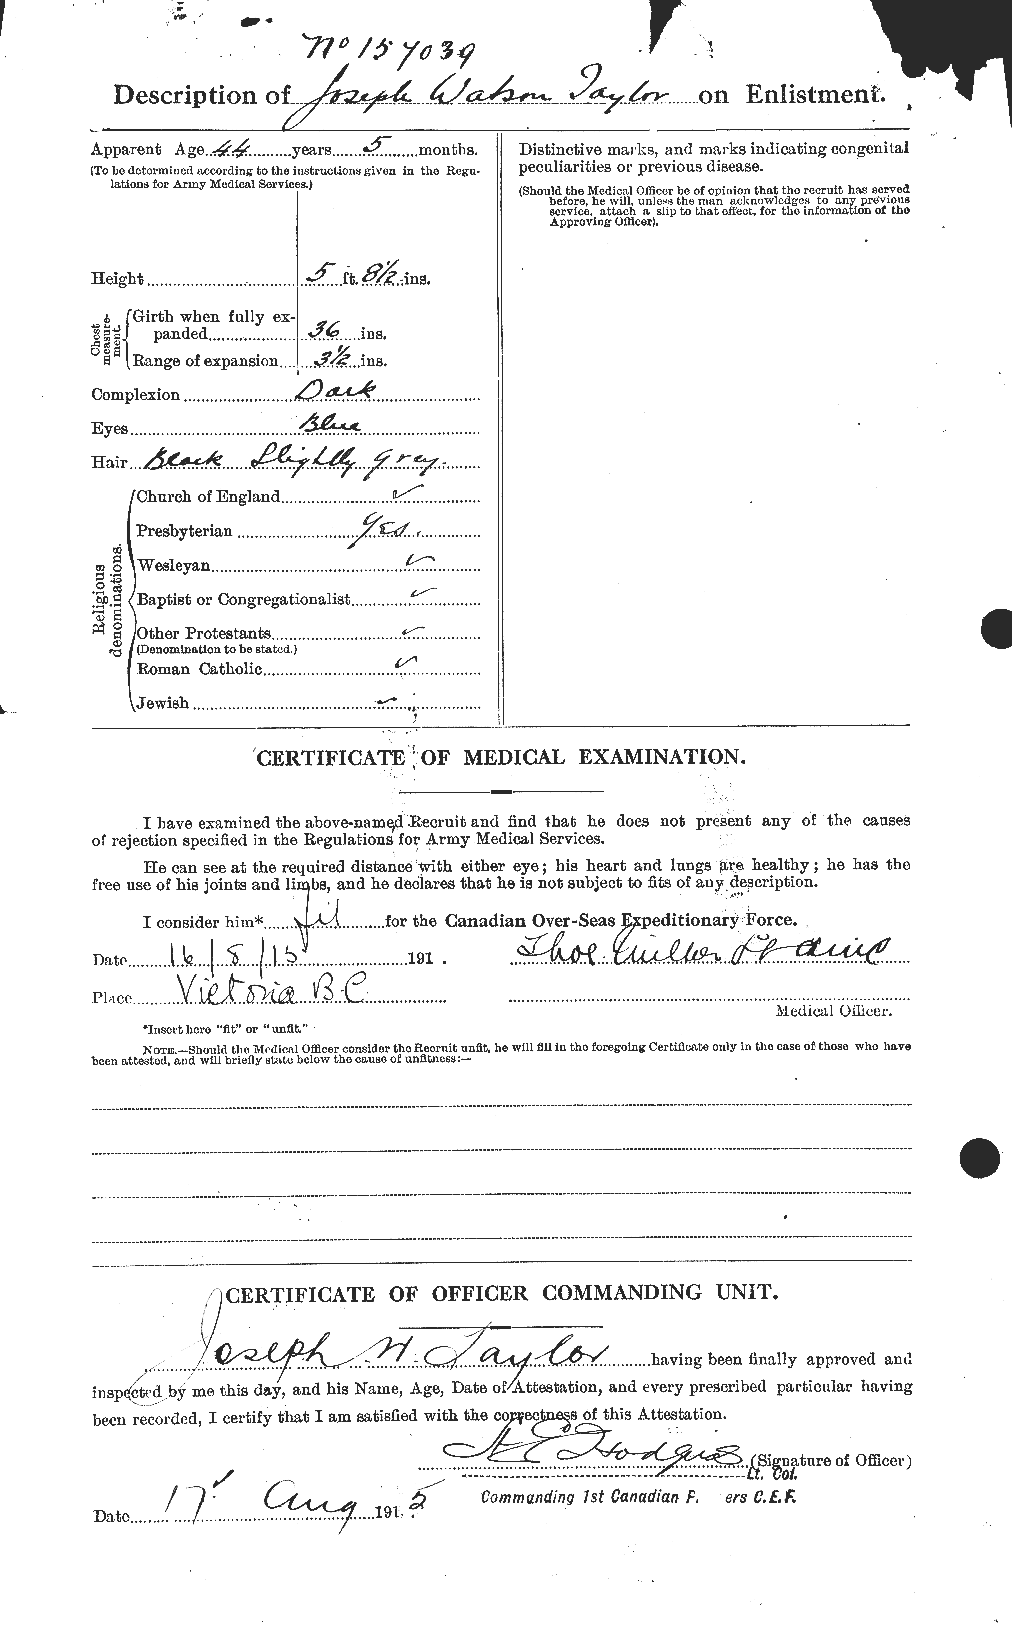 Personnel Records of the First World War - CEF 627589b